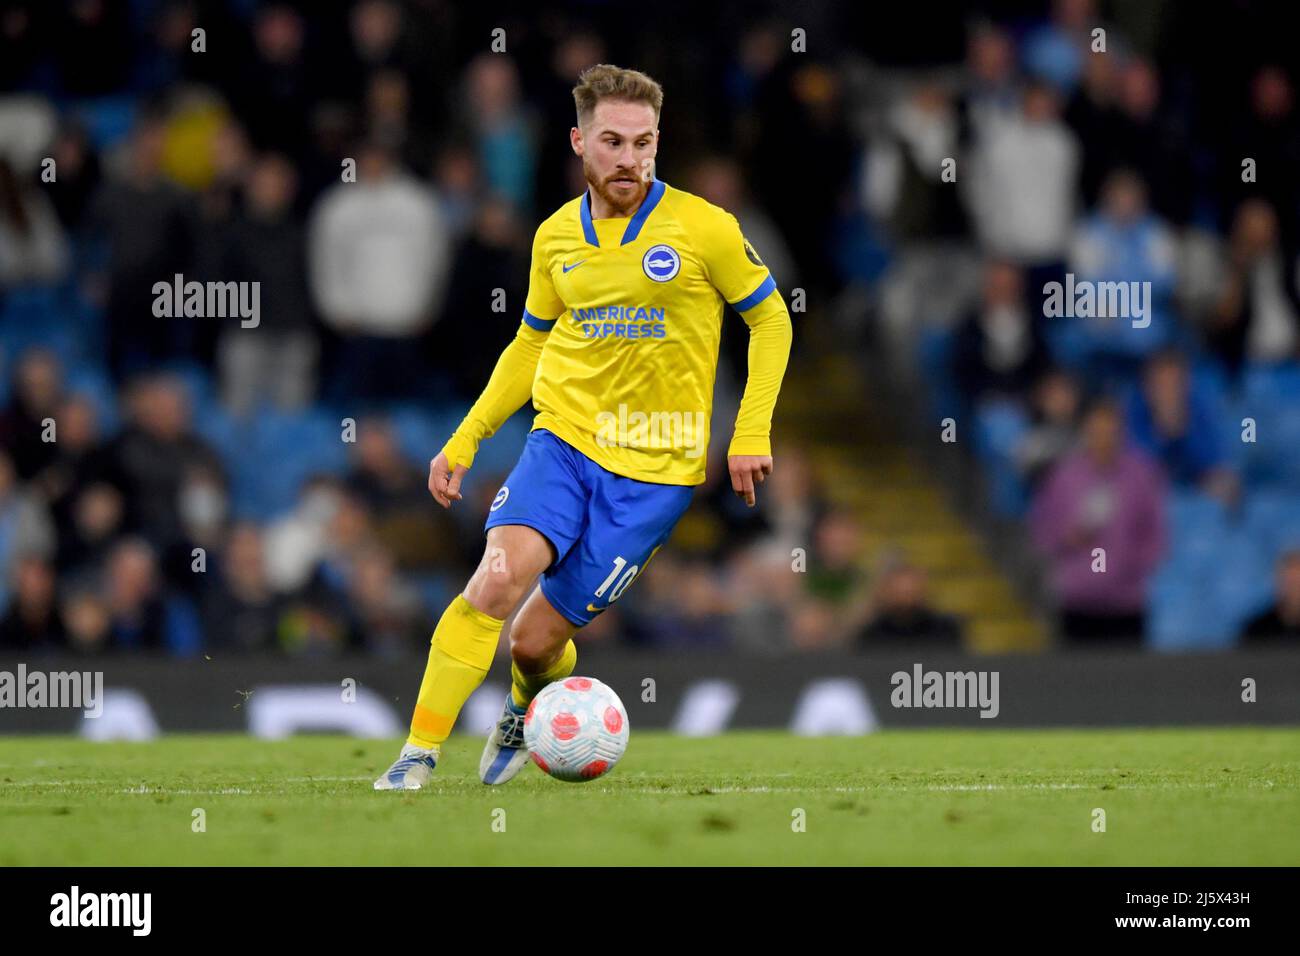 Brighton and Hove Albion's Alex Mac Allister. Picture date: Thursday April 21, 2022. Photo credit should read:   Anthony Devlin/Alamy Live News/Alamy Live News Stock Photo